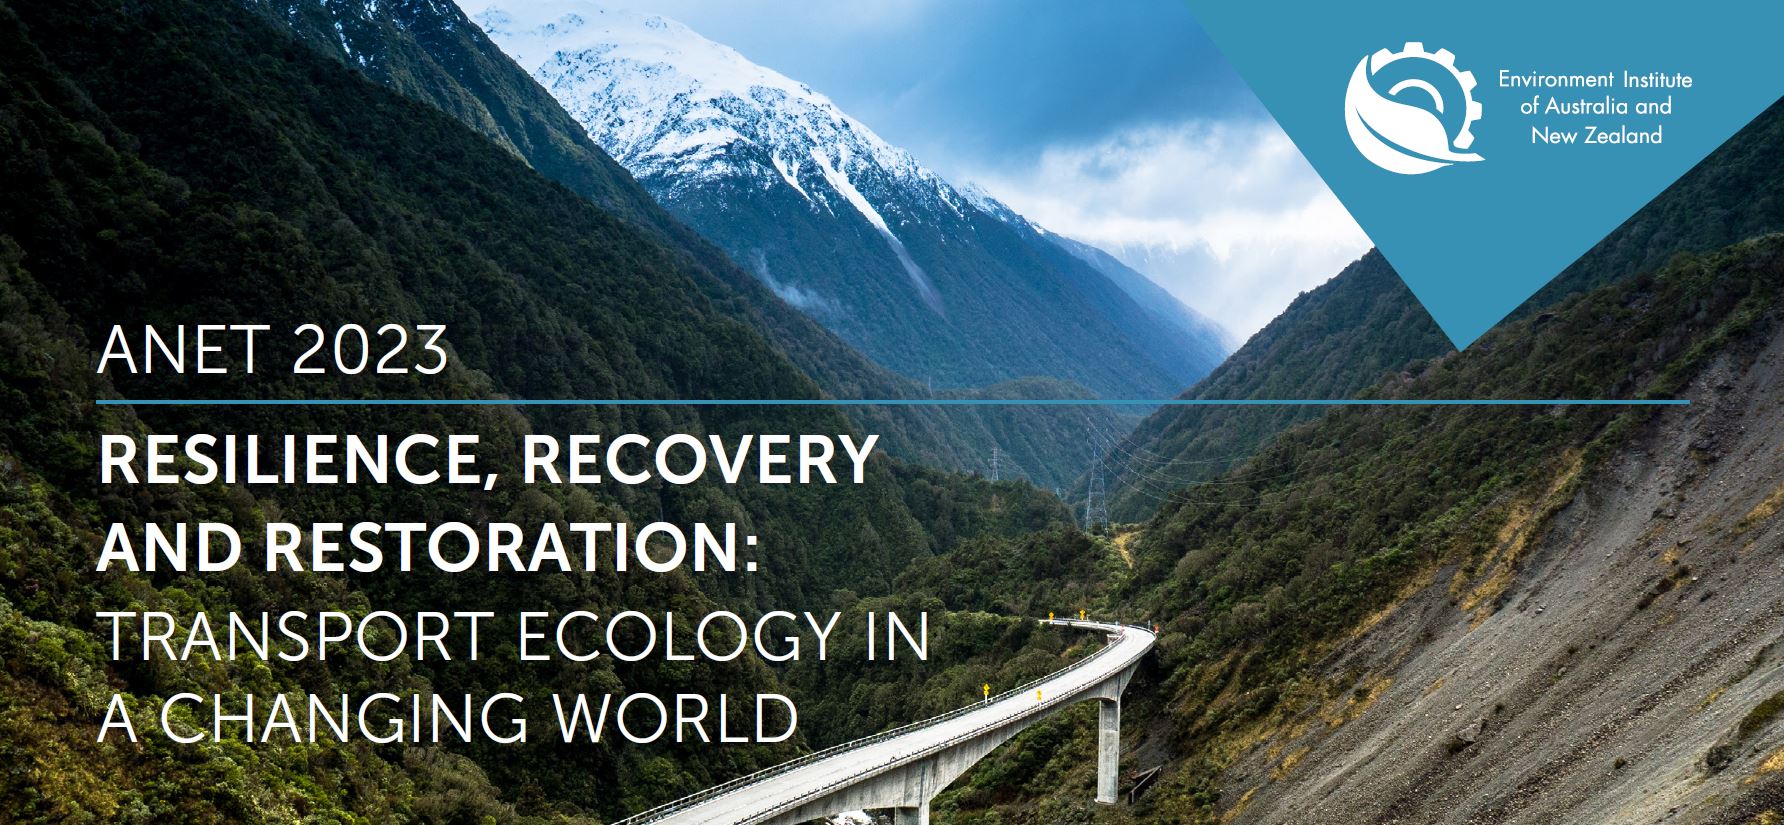 ANET 2023 | Resilience, recovery and restoration: transport ecology in a changing world